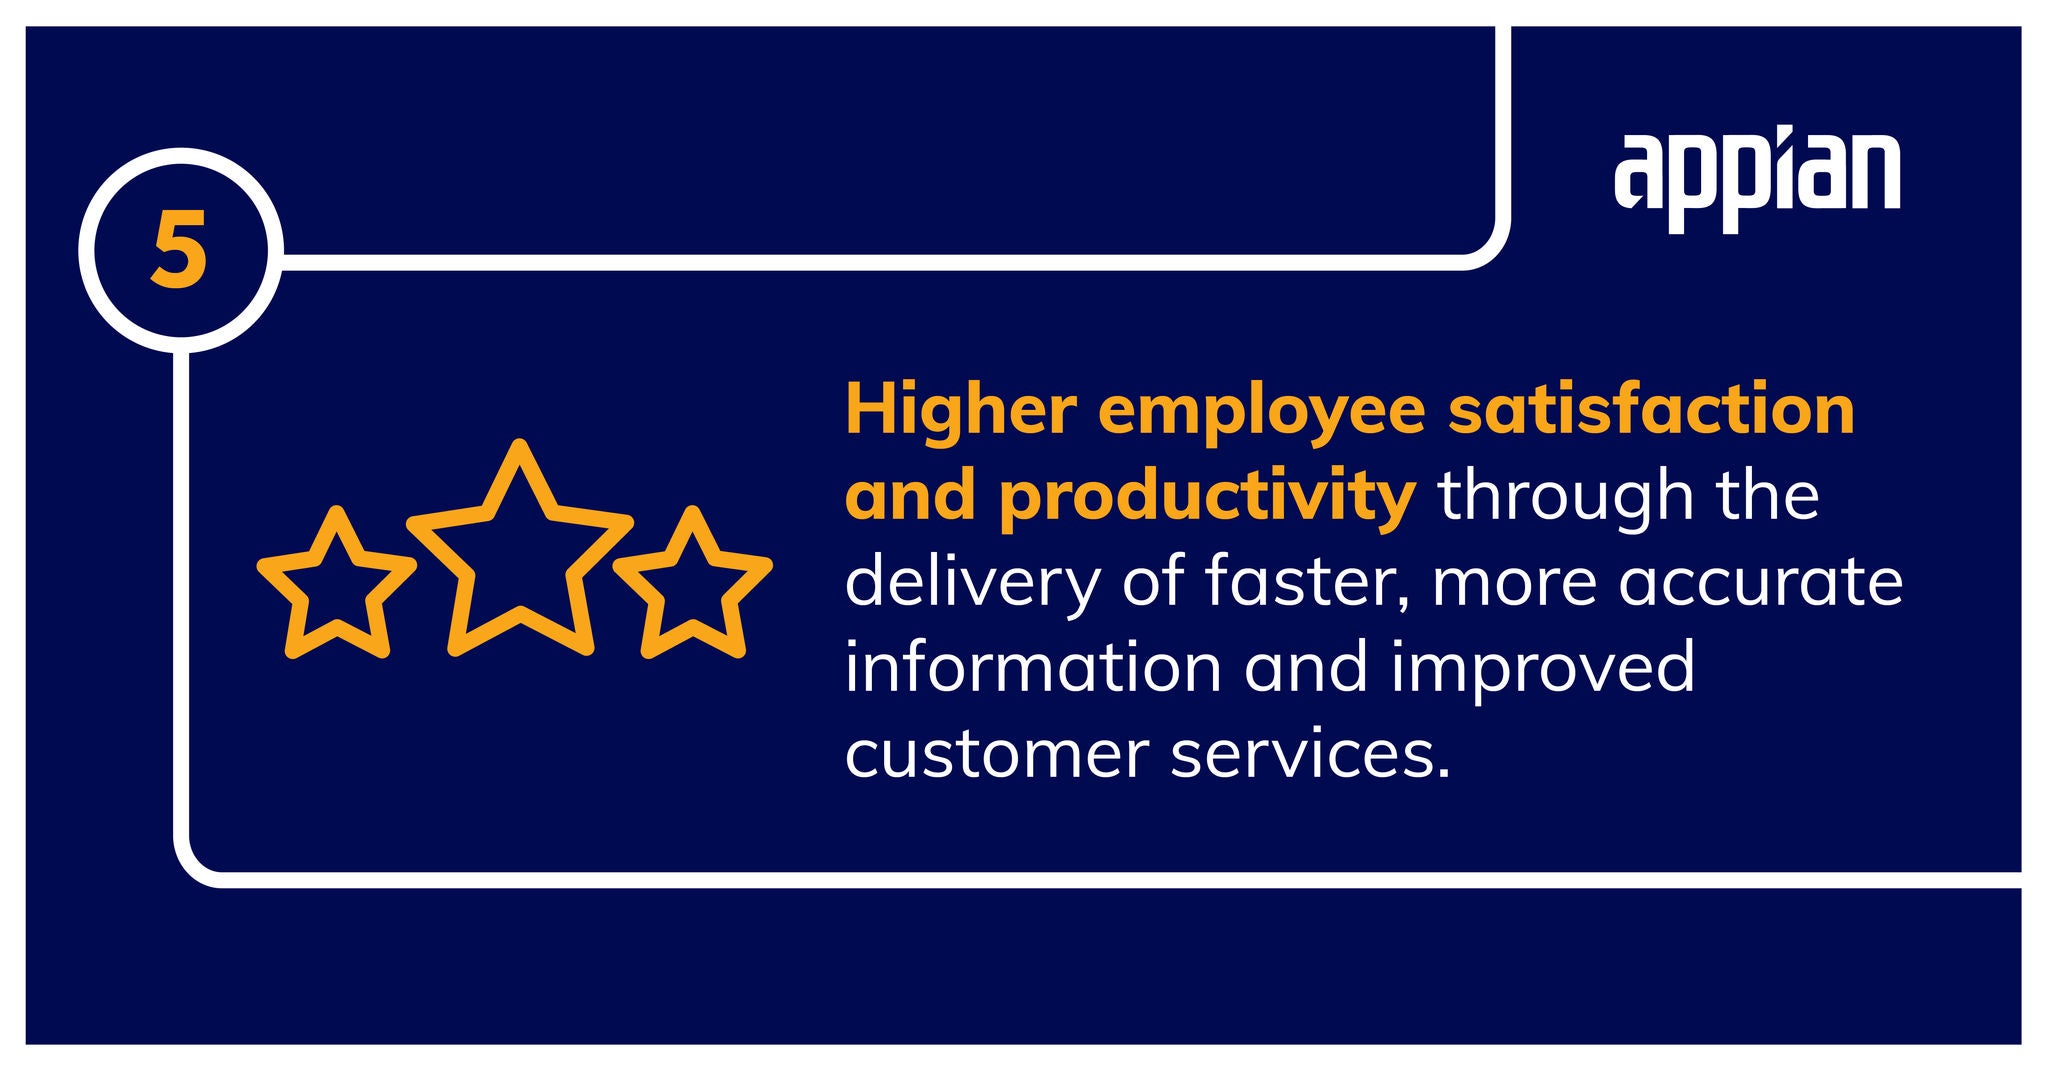 Higher customer satisfaction through the delivery of faster, more accurate information and improved customer services.